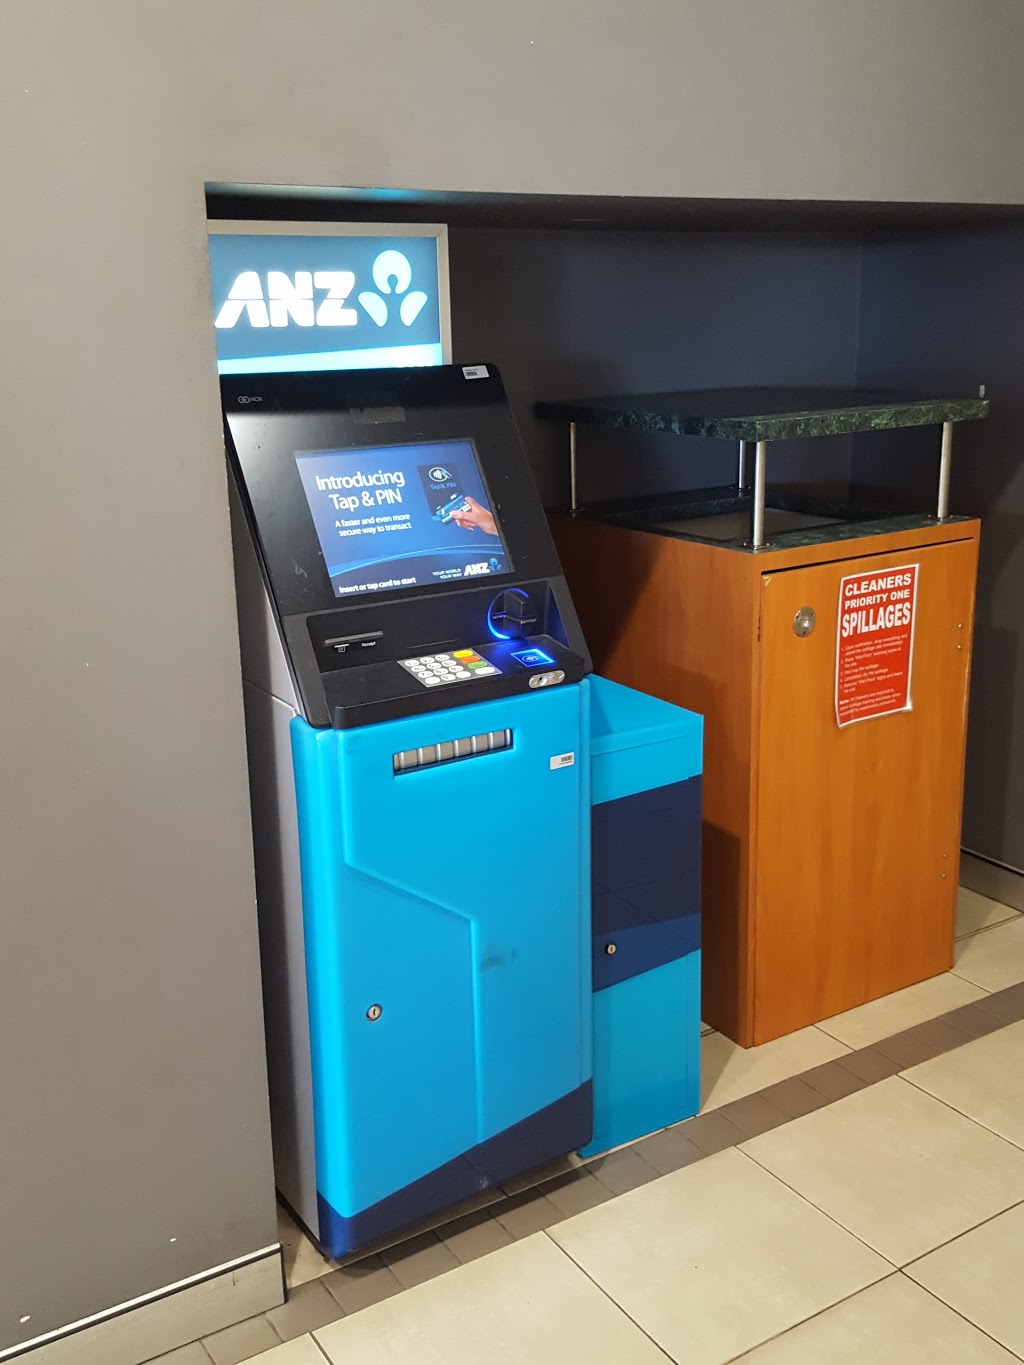 ANZ ATM Nudgee Shell | atm | 1097 Nudgee Rd, Nudgee QLD 4014, Australia | 131314 OR +61 131314